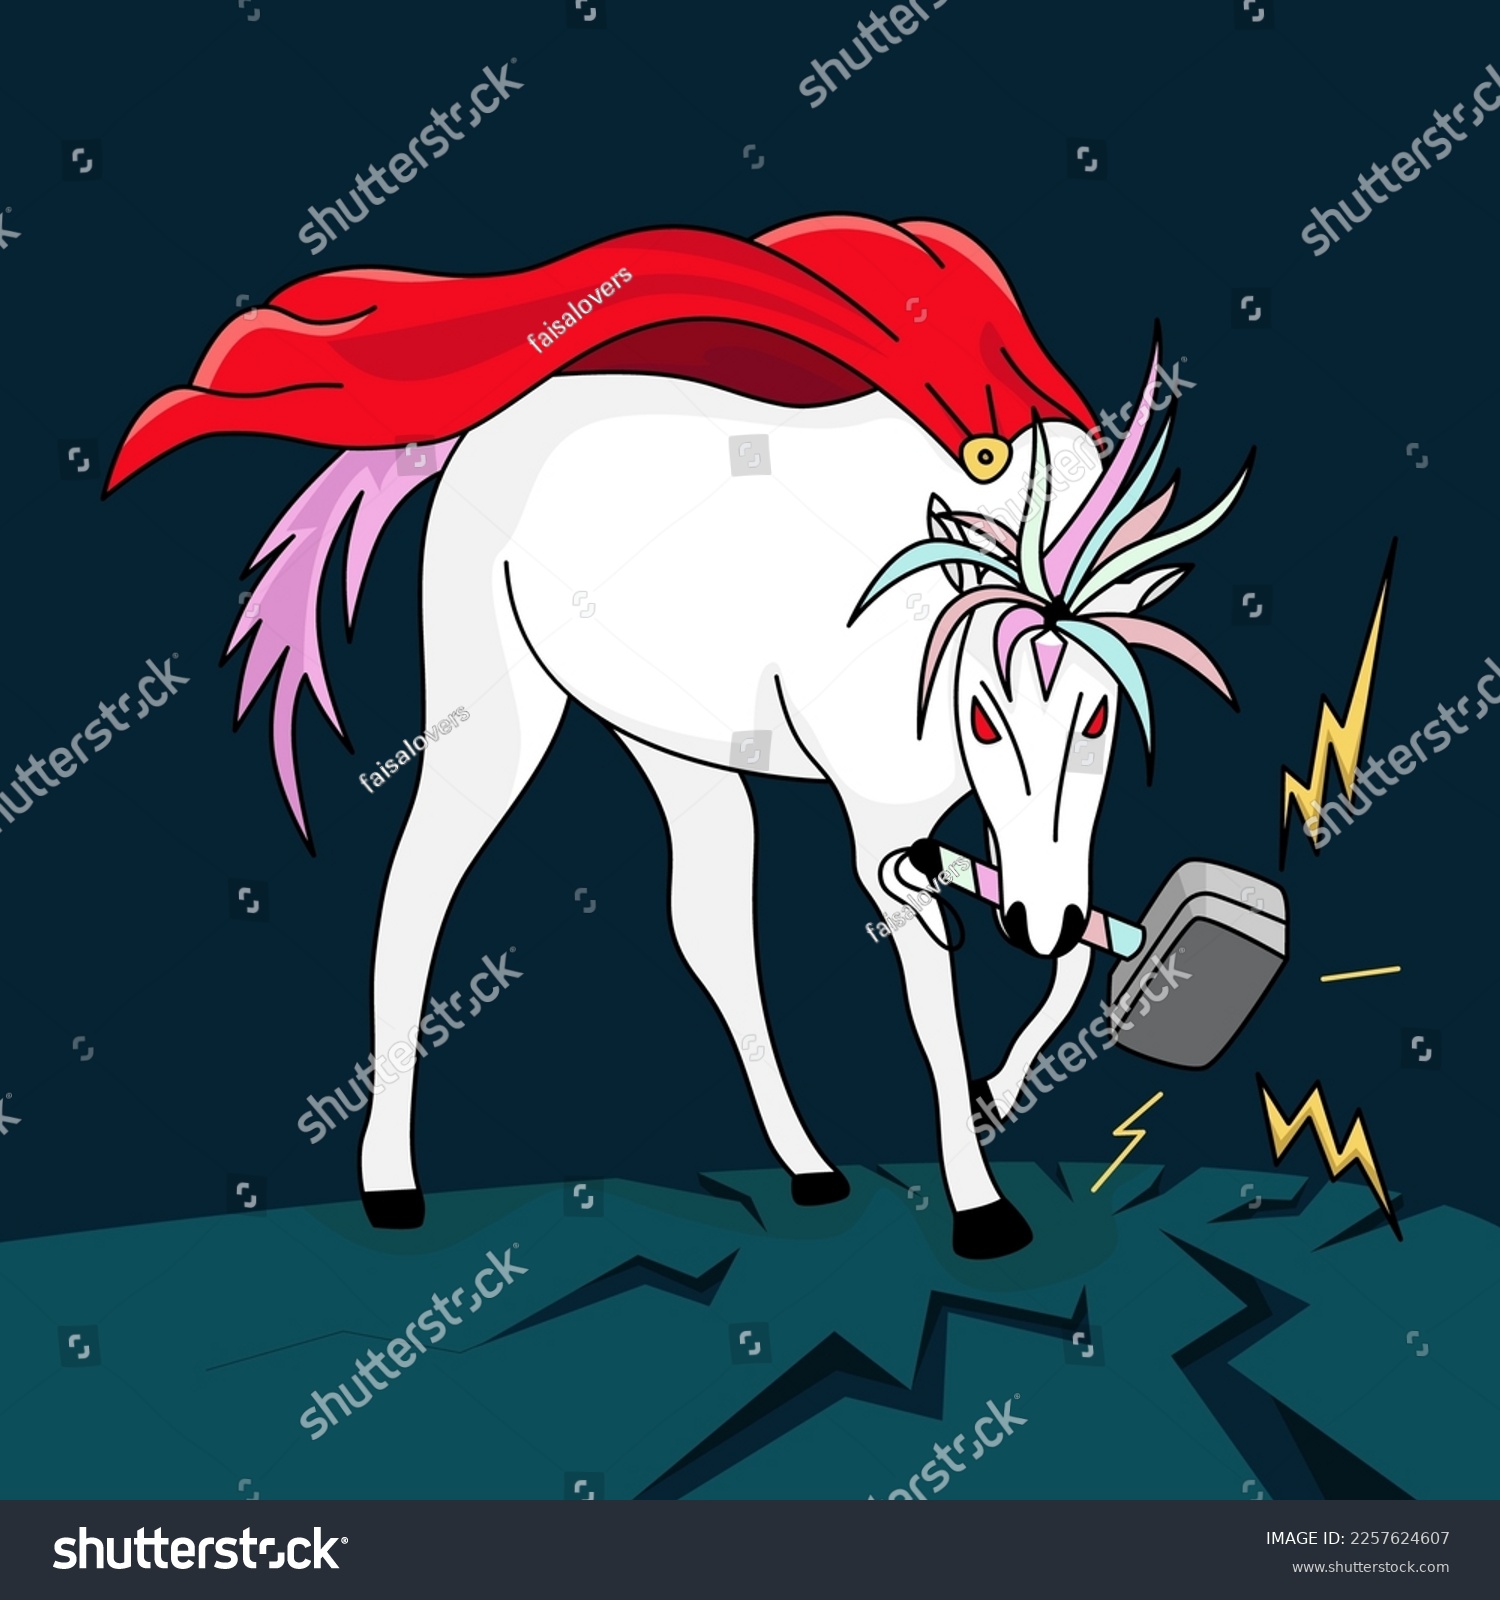 SVG of Looking for inspiration to draw an angry unicorn turning into Thor. superhero concept. svg